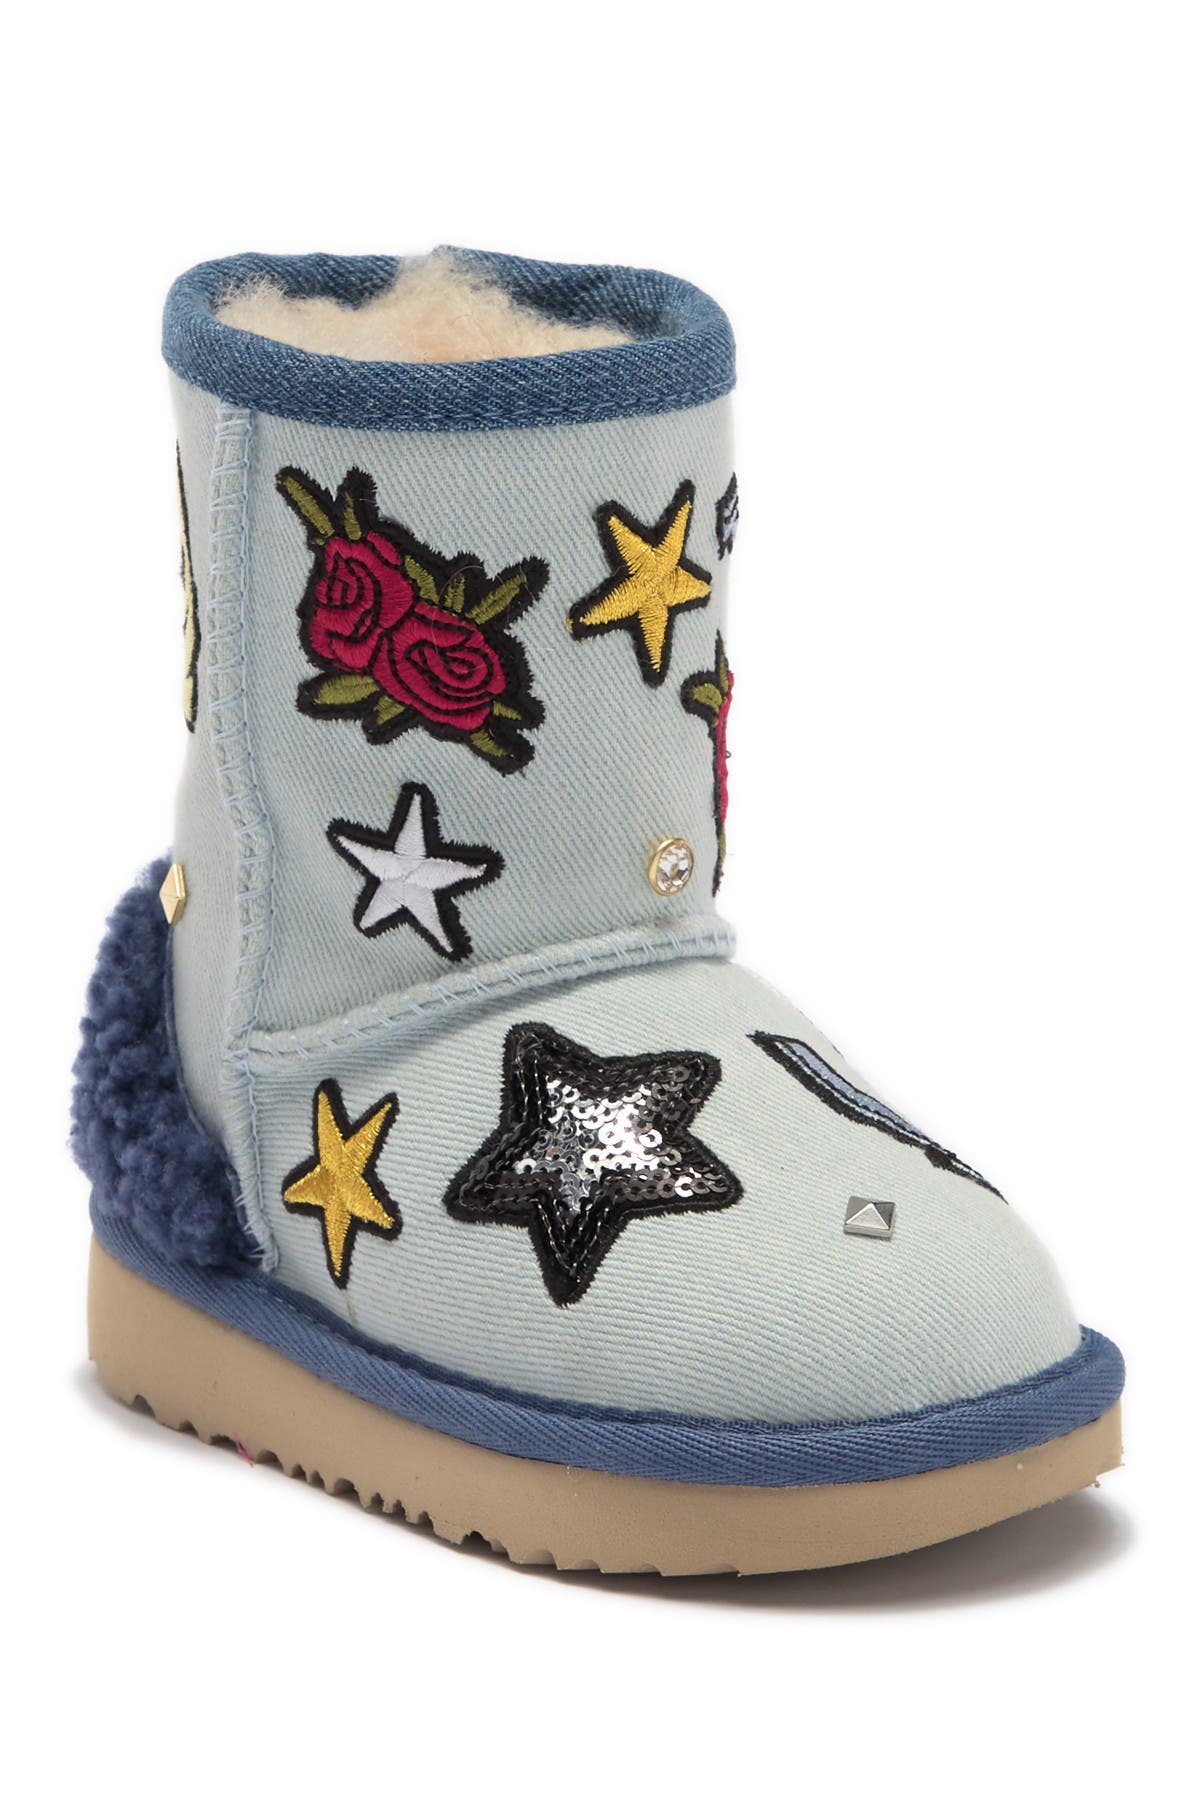 uggs with patches on them